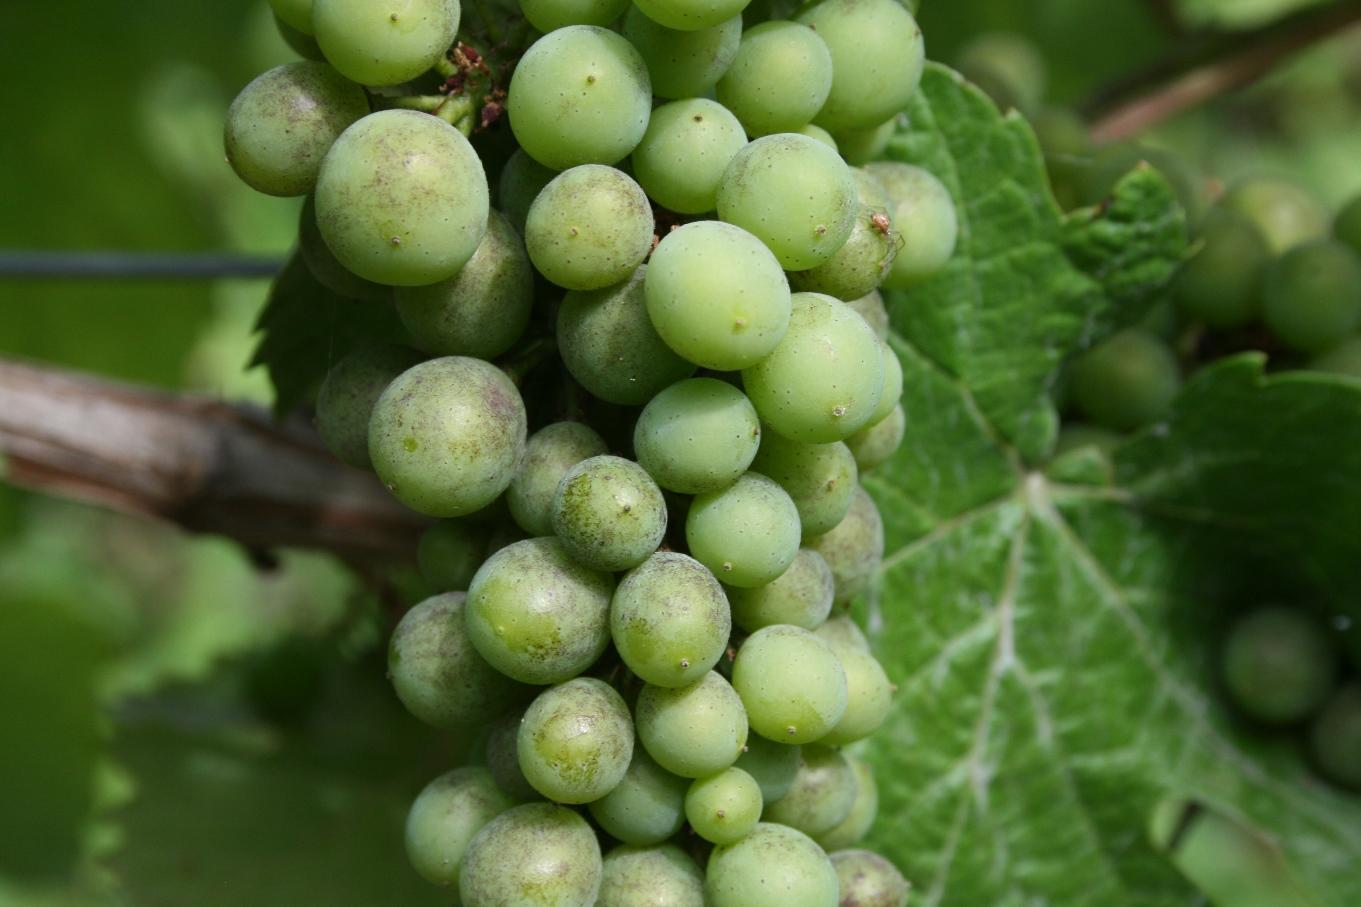 Pinot noir cluster with powdery mildew infection before veraison.